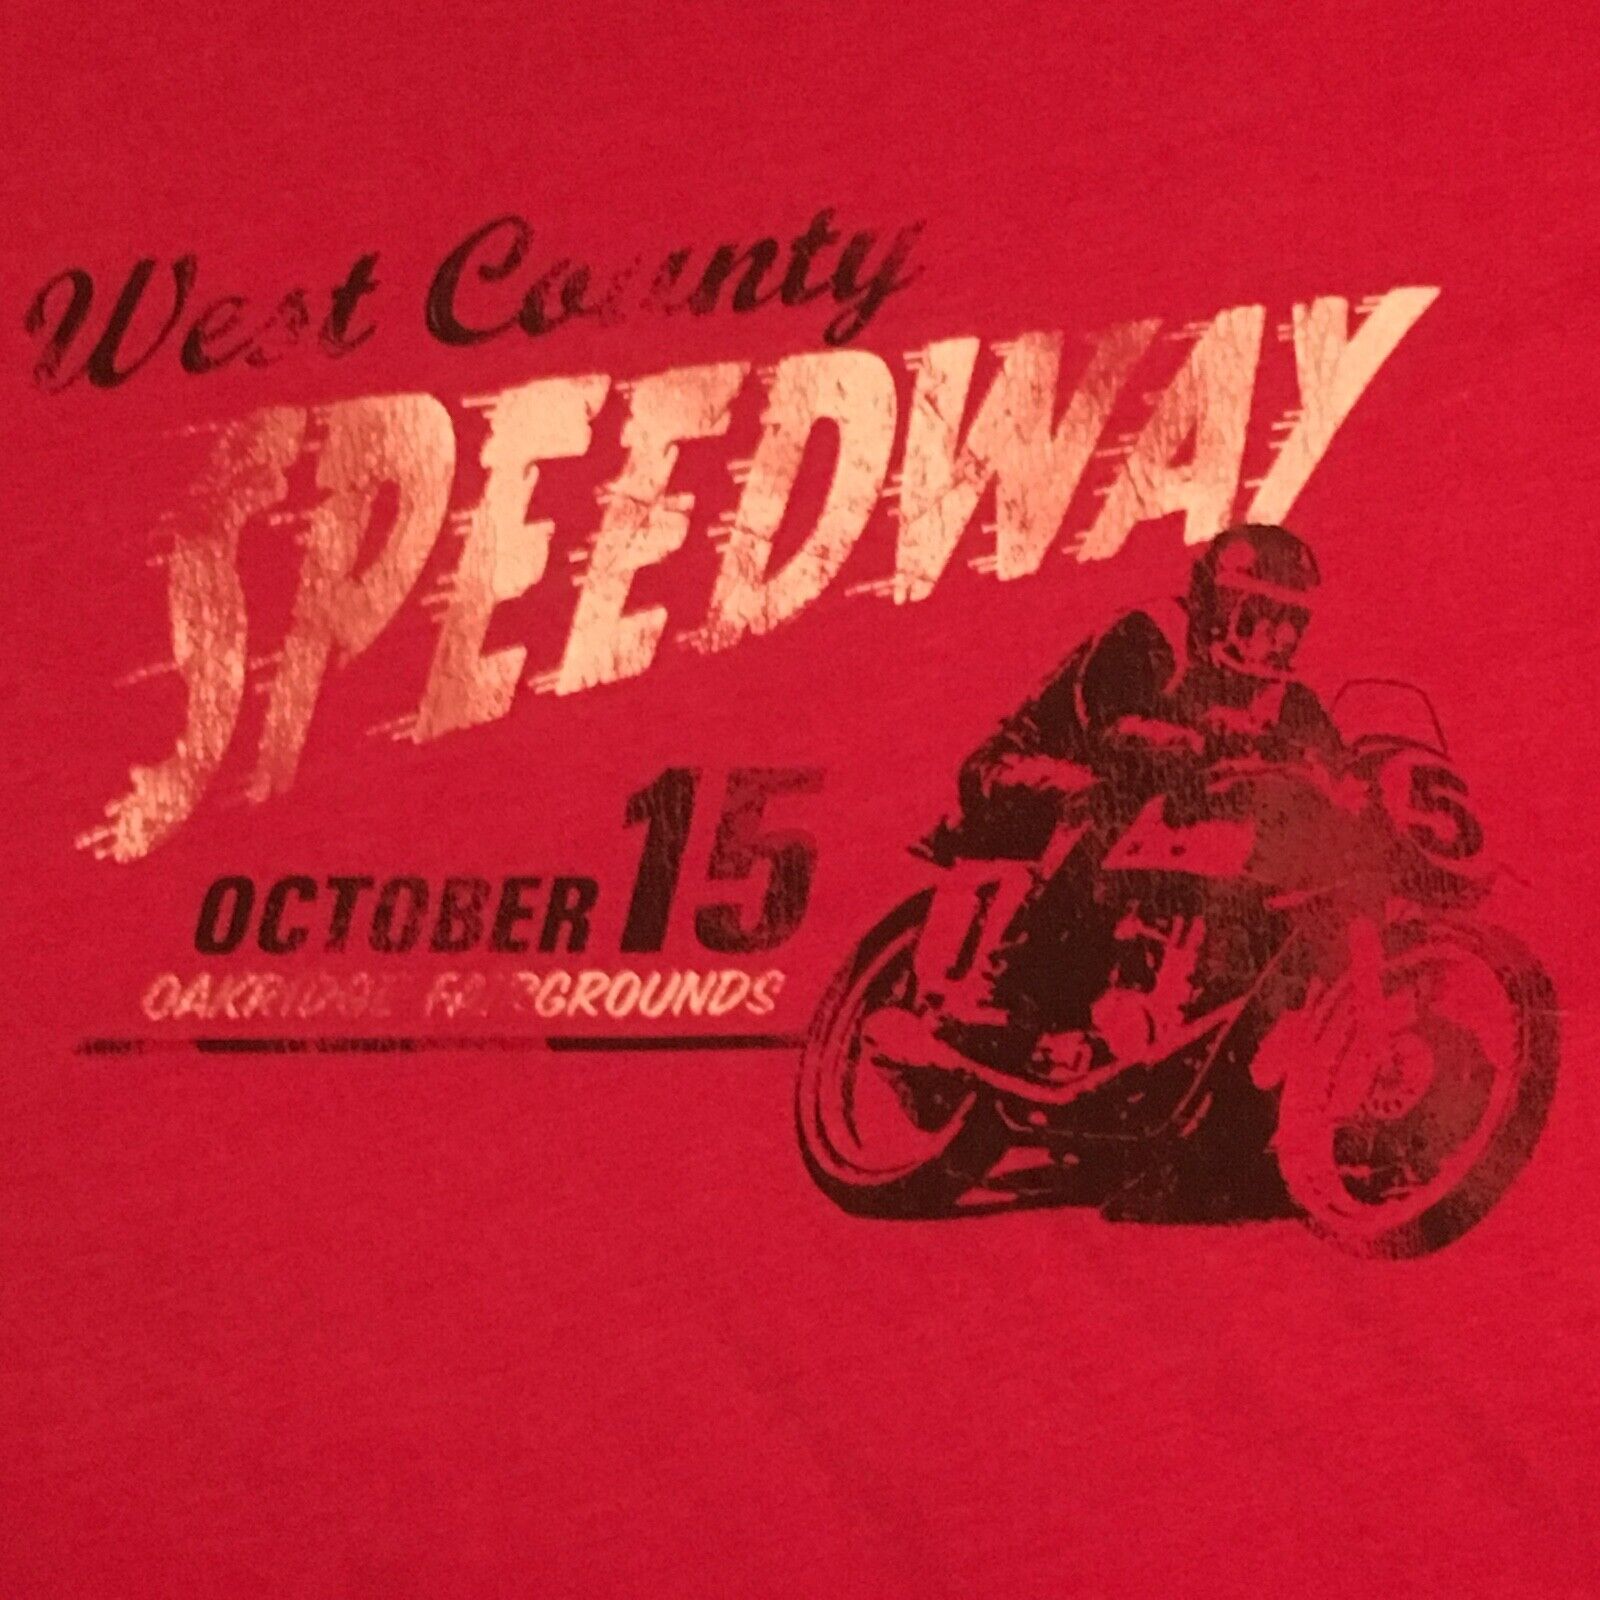 retro SPEEDWAY MOTORCYCLE RACE t-shirt-VINTAGE LOOK-label (XL) big enuf for XXL